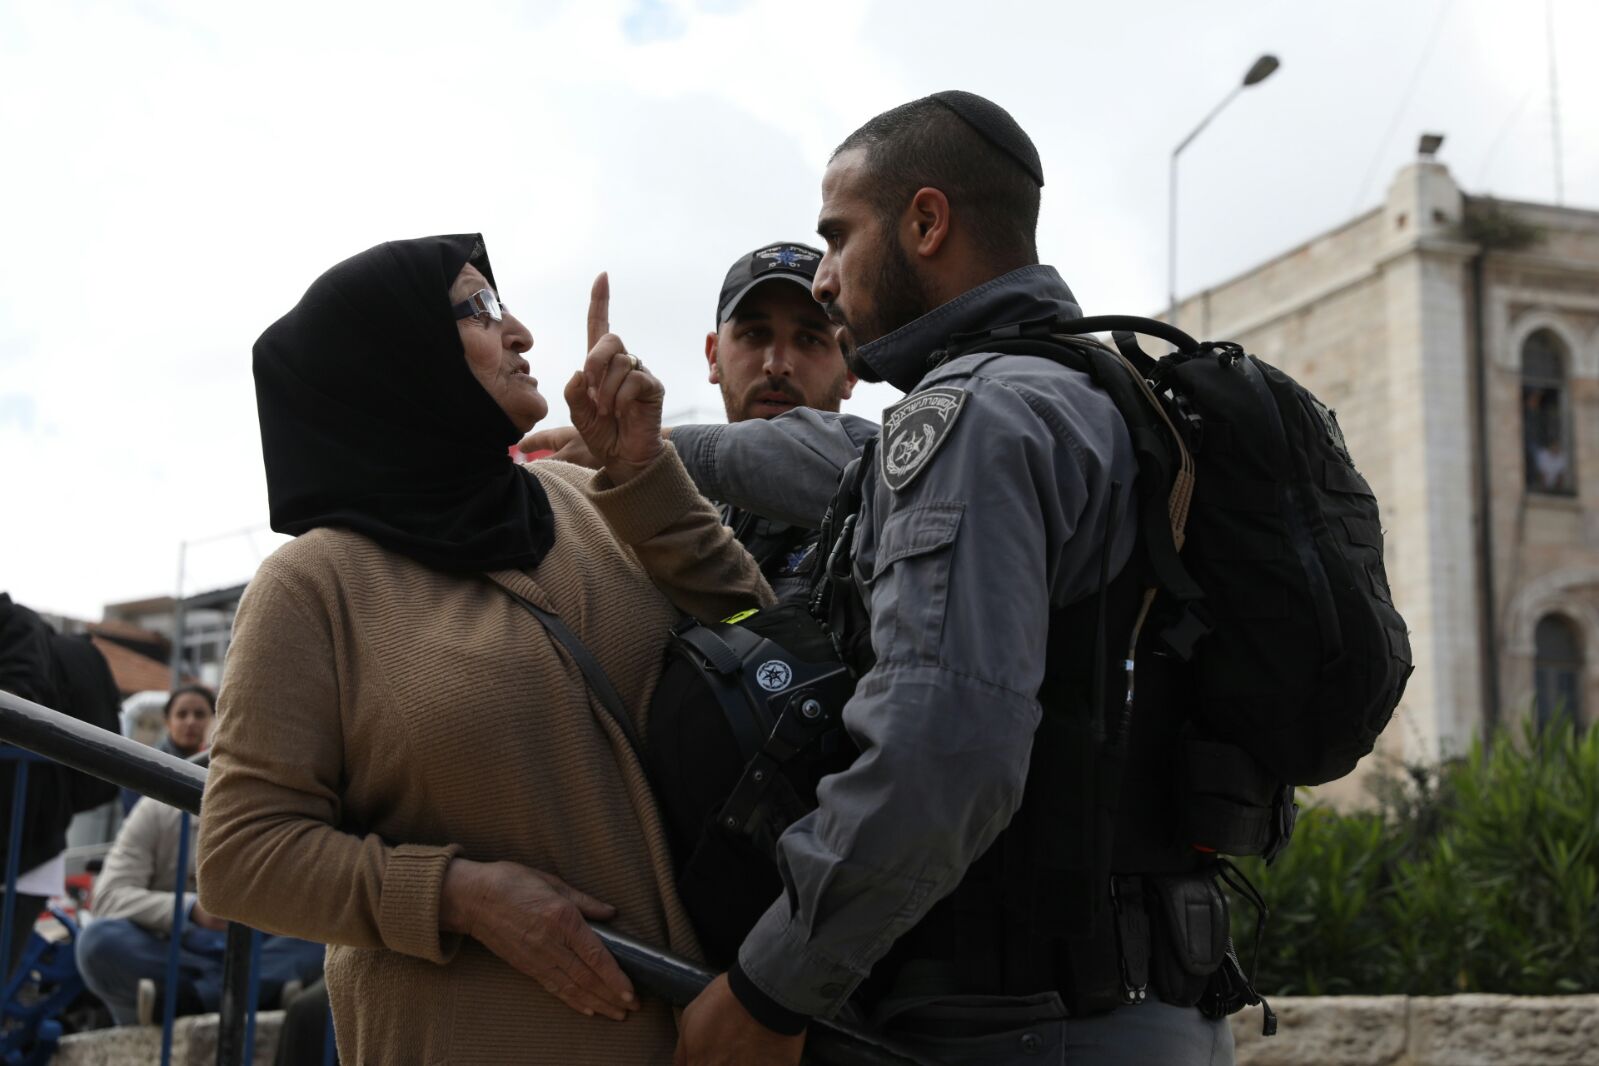 A Palestinian woman argues with an Israeli Border Police officer during Jerusalem Day celebrations near the Old City, May 13, 2018. (Oren Ziv/Activestills.org)